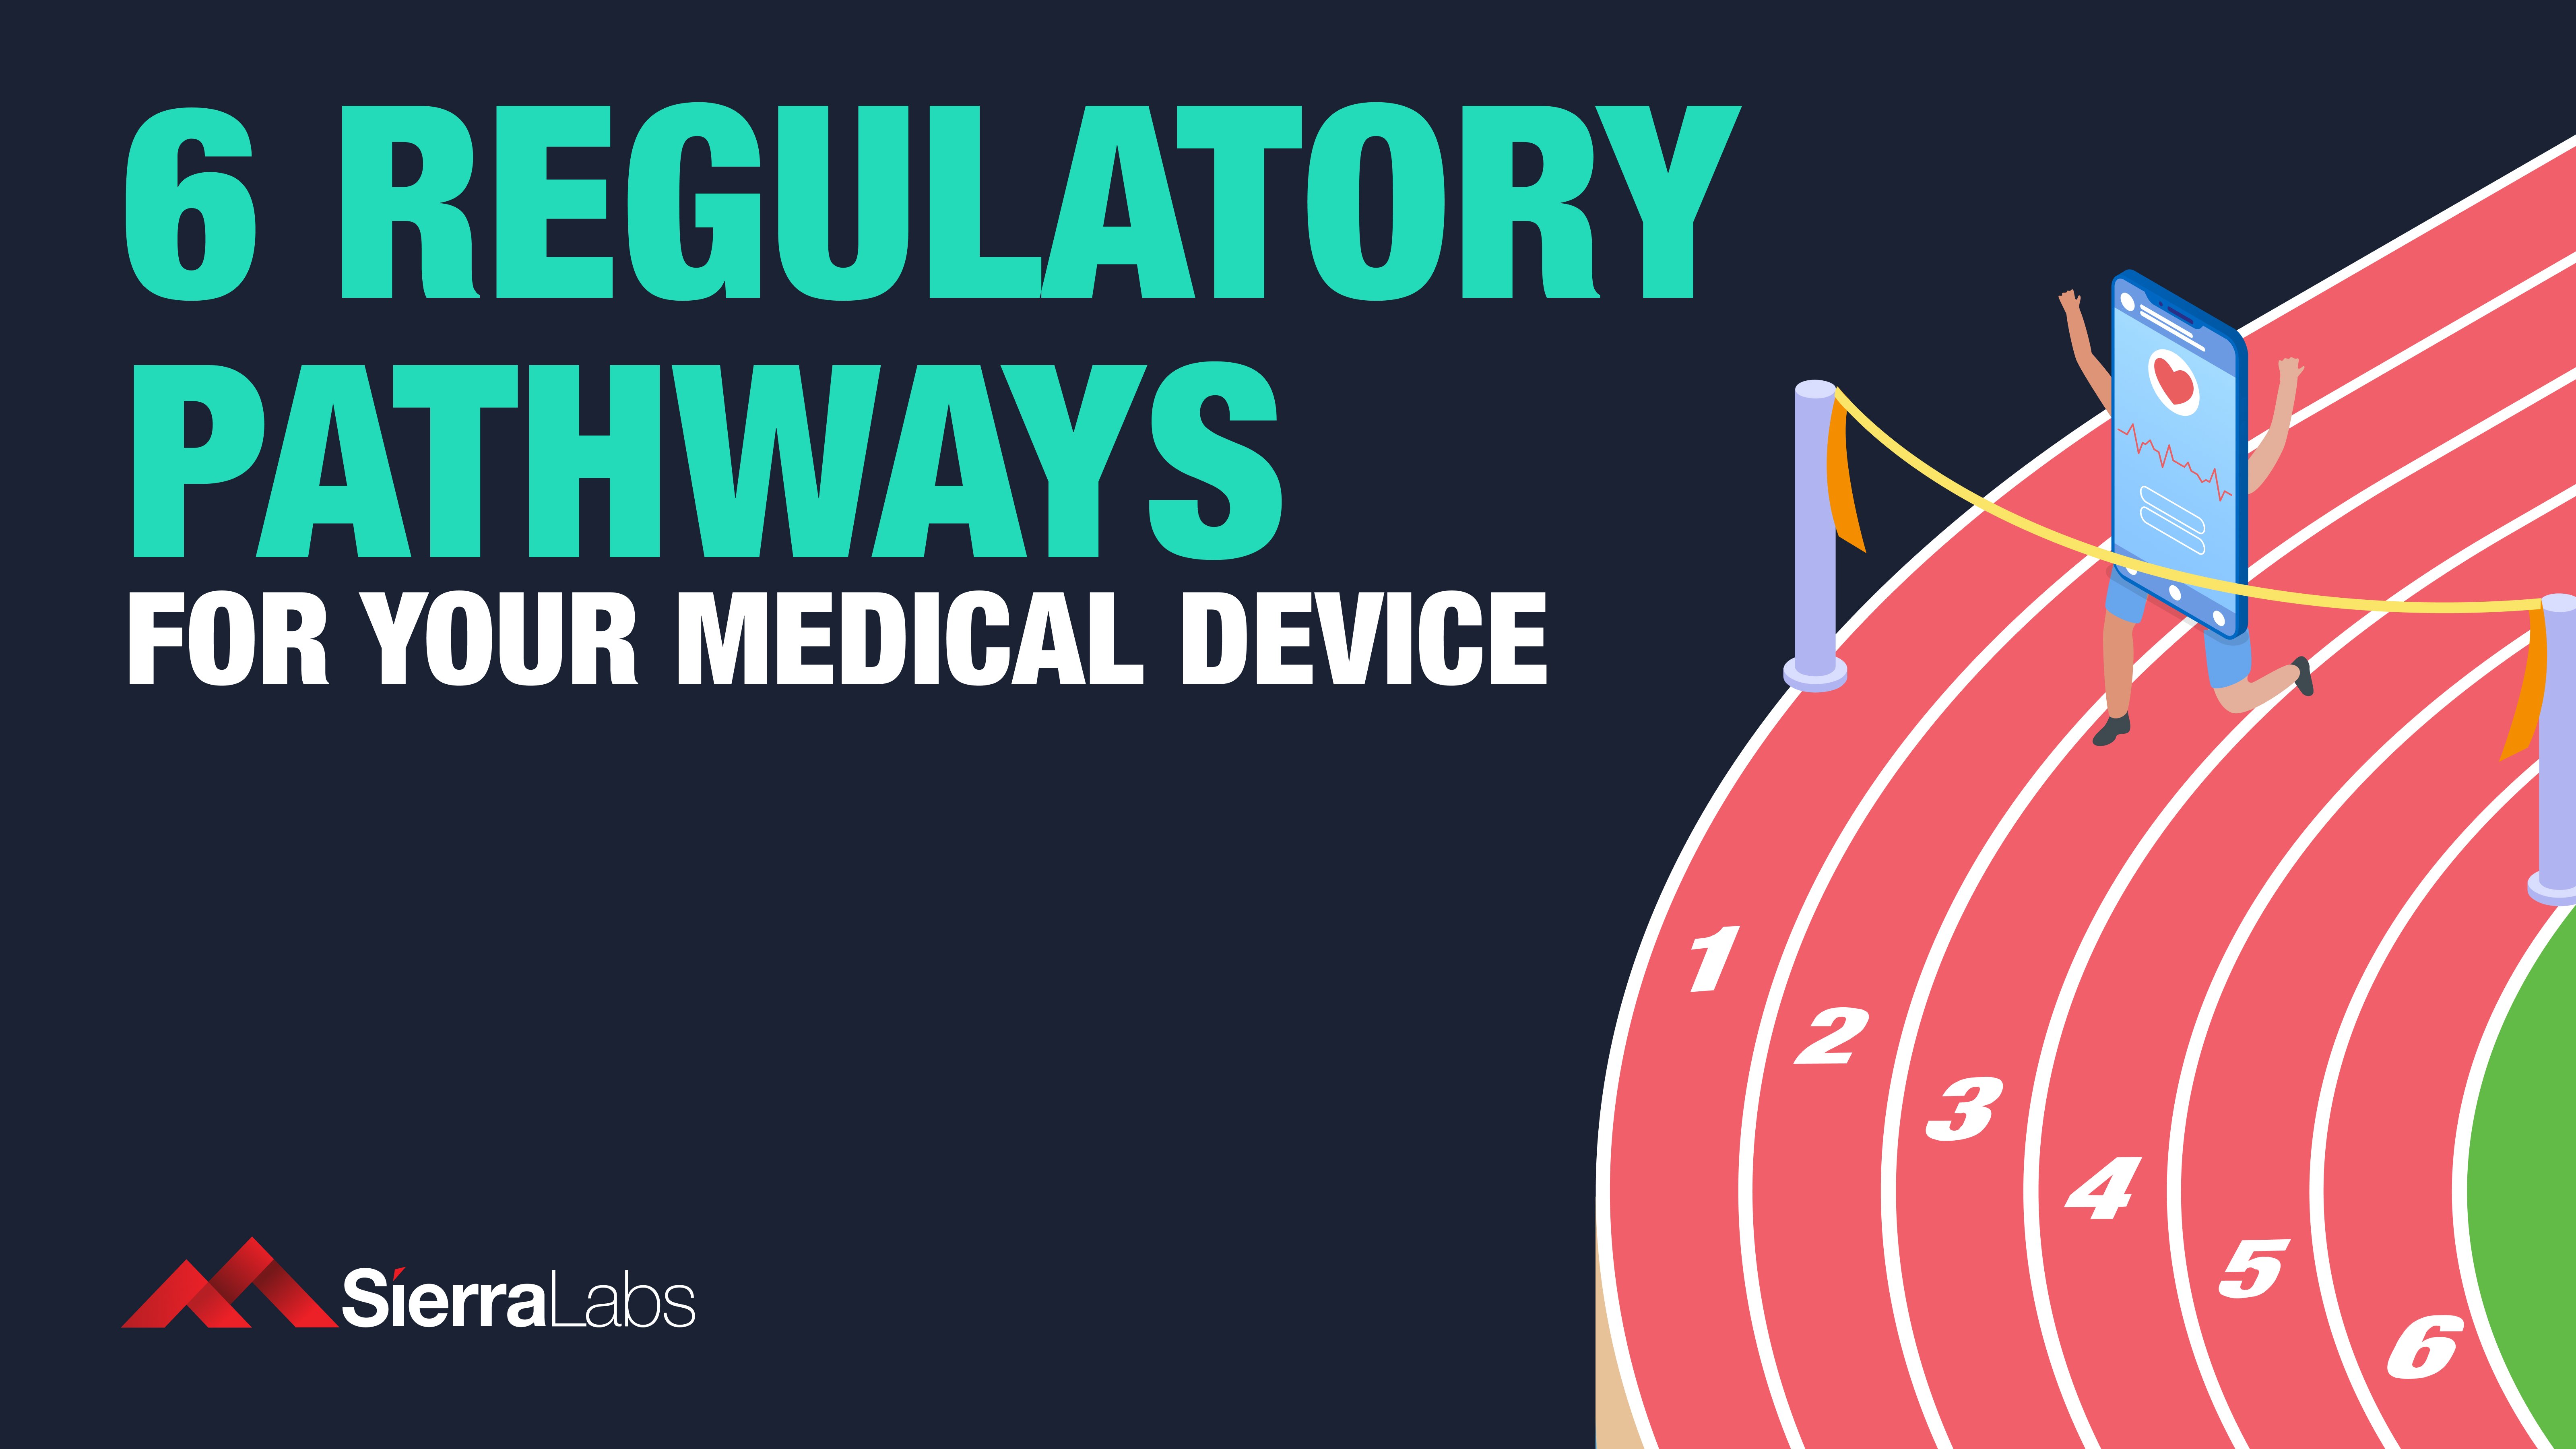 Regulatory Pathways For Your Medical Device